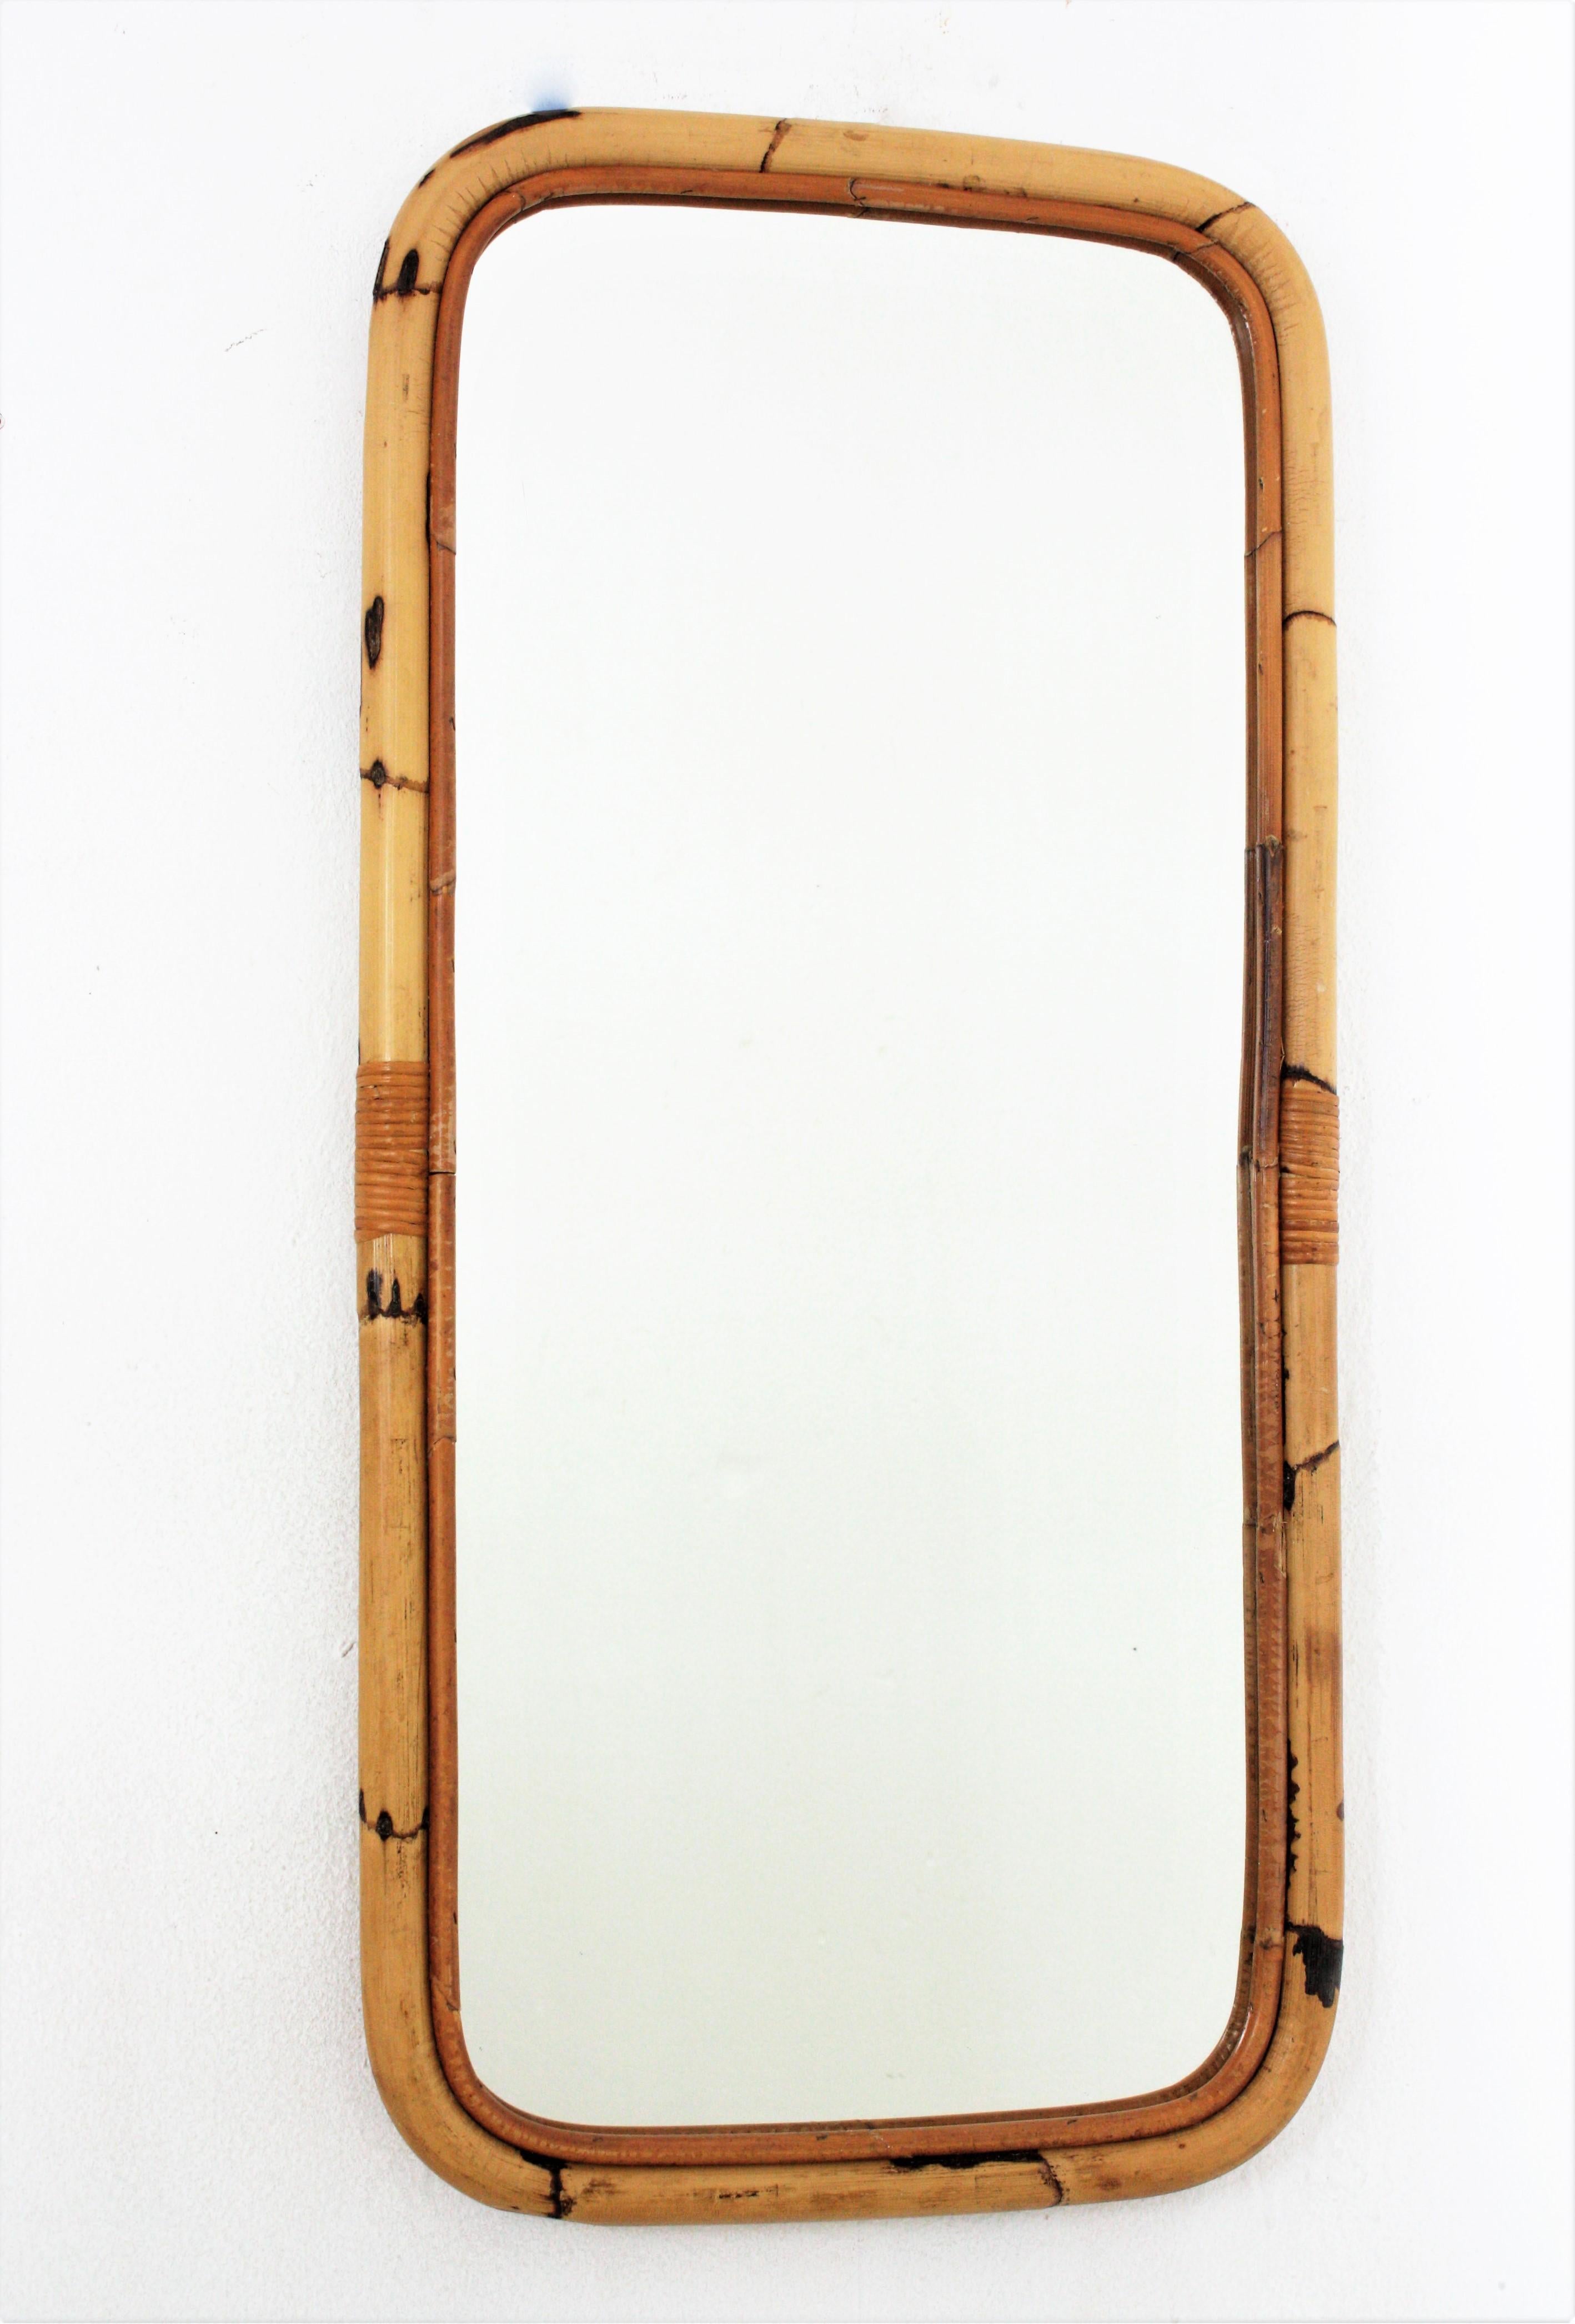 Rectangular tall mirror, bamboo, rattan
Eye-catching rectangular mirror handcrafted with bamboo cane. Spain, 1960s.
Rectangular frame made of bamboo with rounded corners. 
This mirror is in excellent vintage condition.
It will be a nice addition to